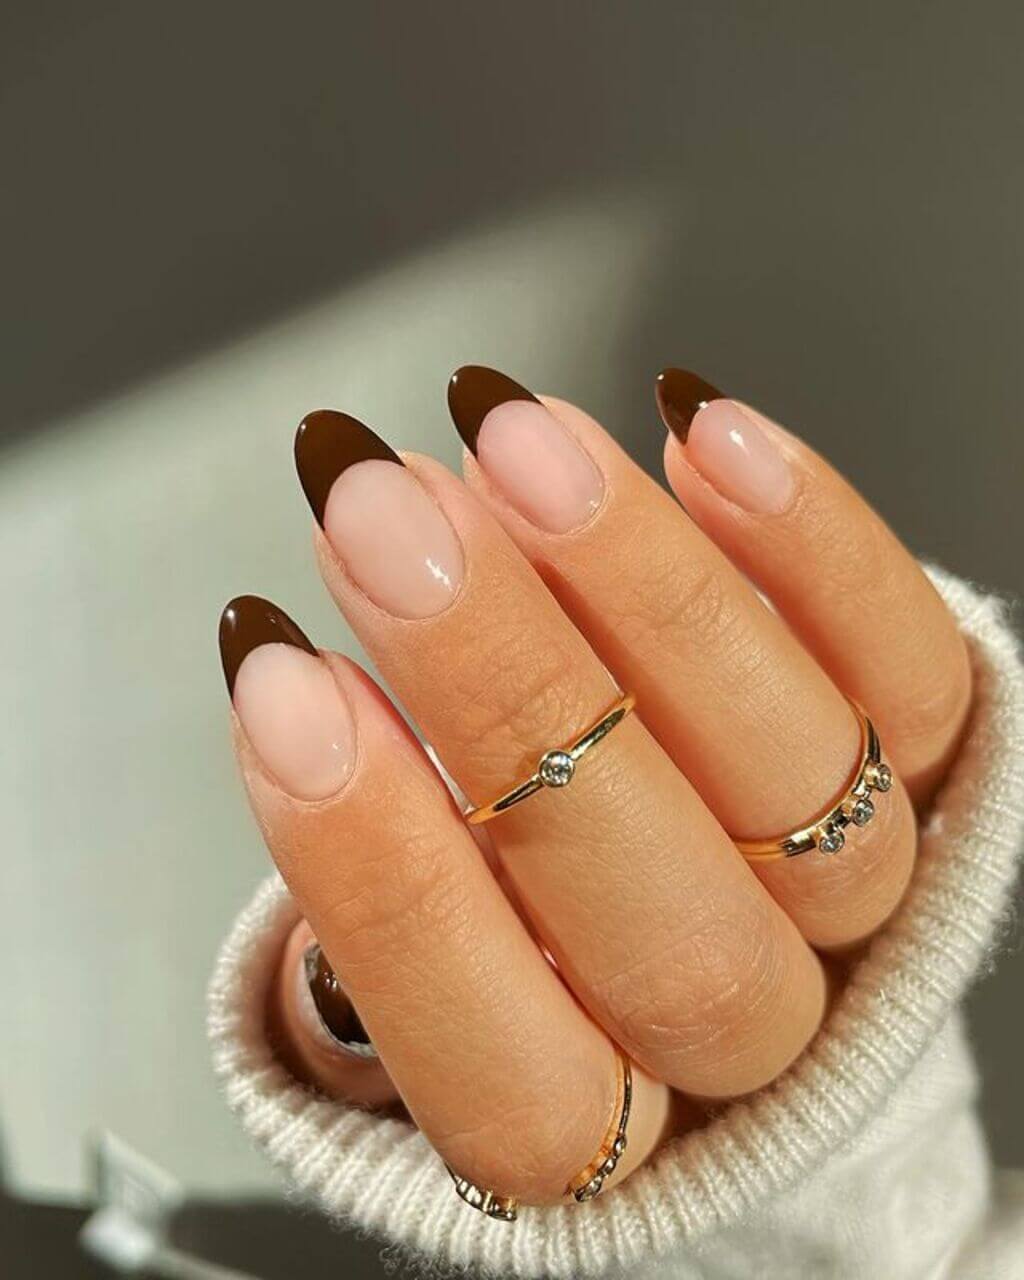 Chocolate French Tips nails ideas